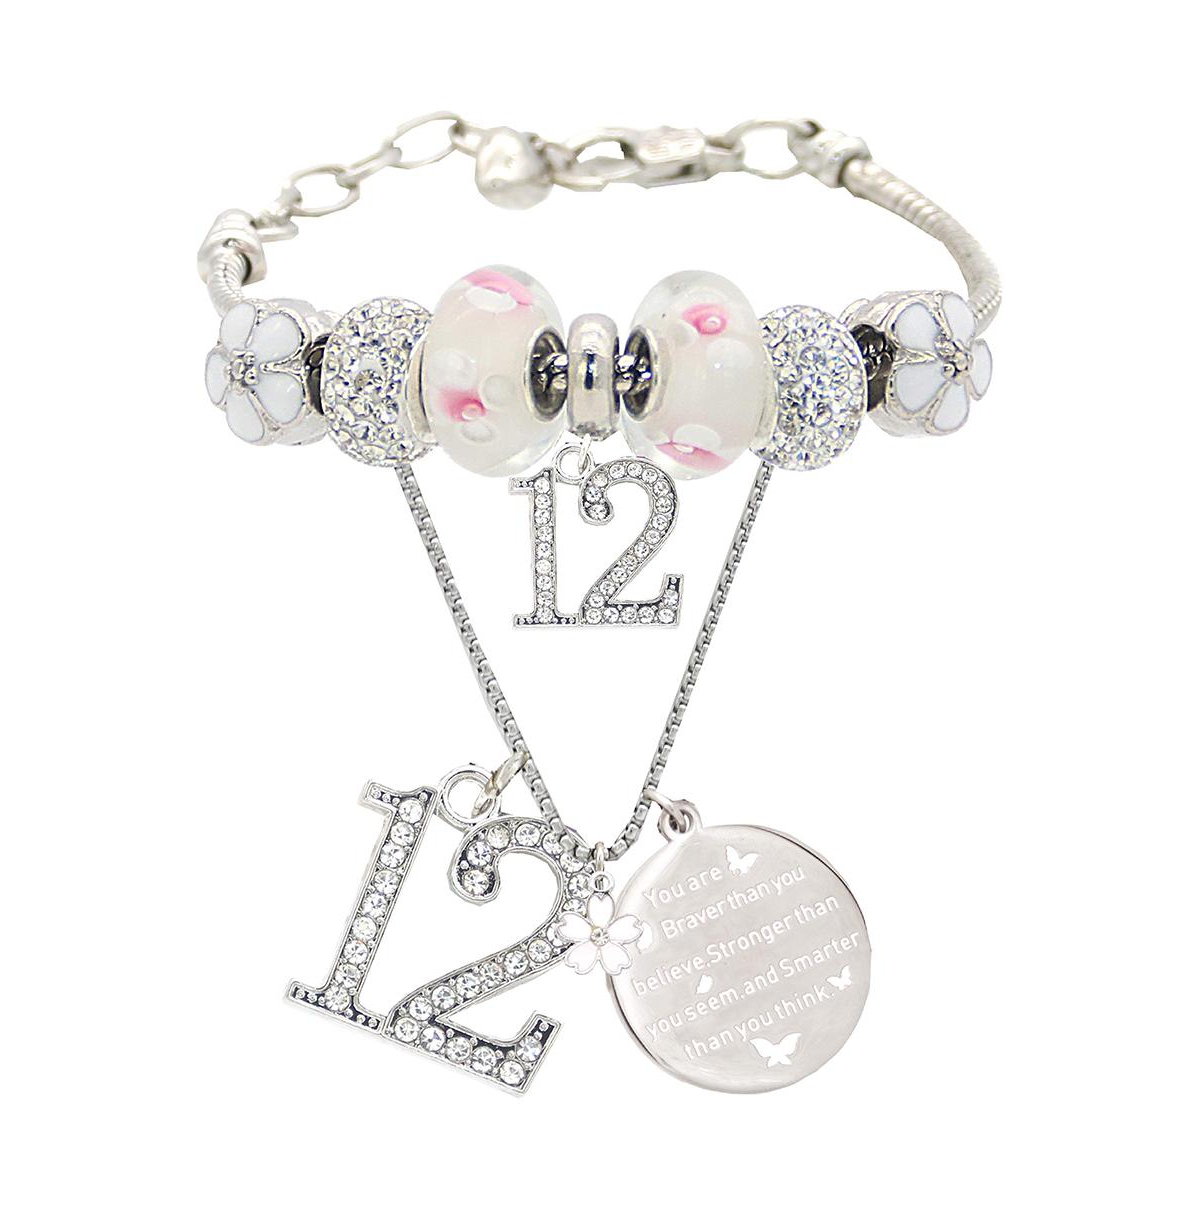 12th Birthday Gifts for Girls: Bracelets and Necklaces - Perfect for Celebrating a Special Milestone in Style - Silver